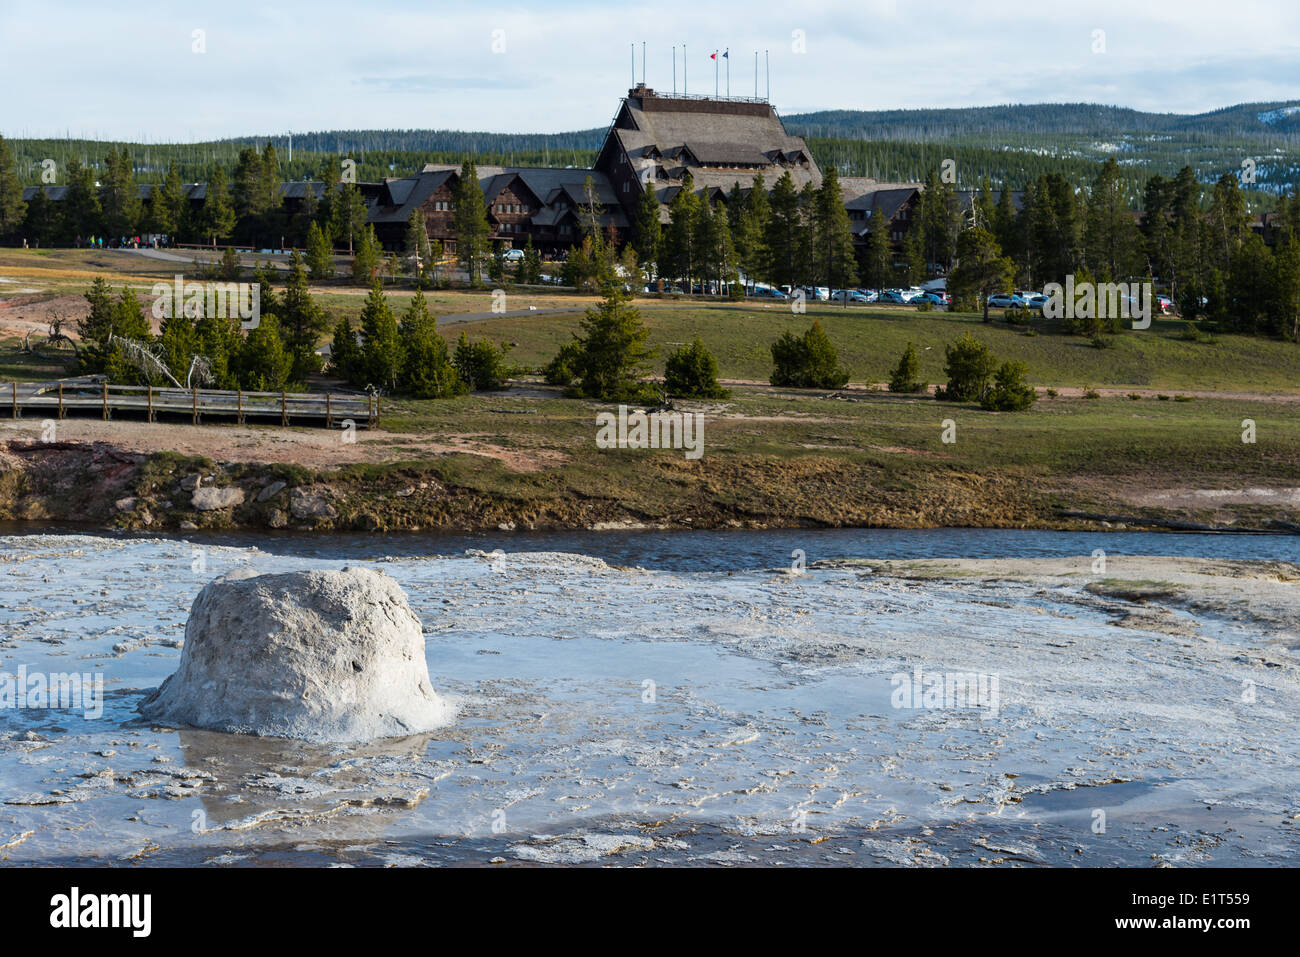 The Beehive Geyser, with Old Faithful Inn in background. Yellowstone National Park, Wyoming, USA. Stock Photo